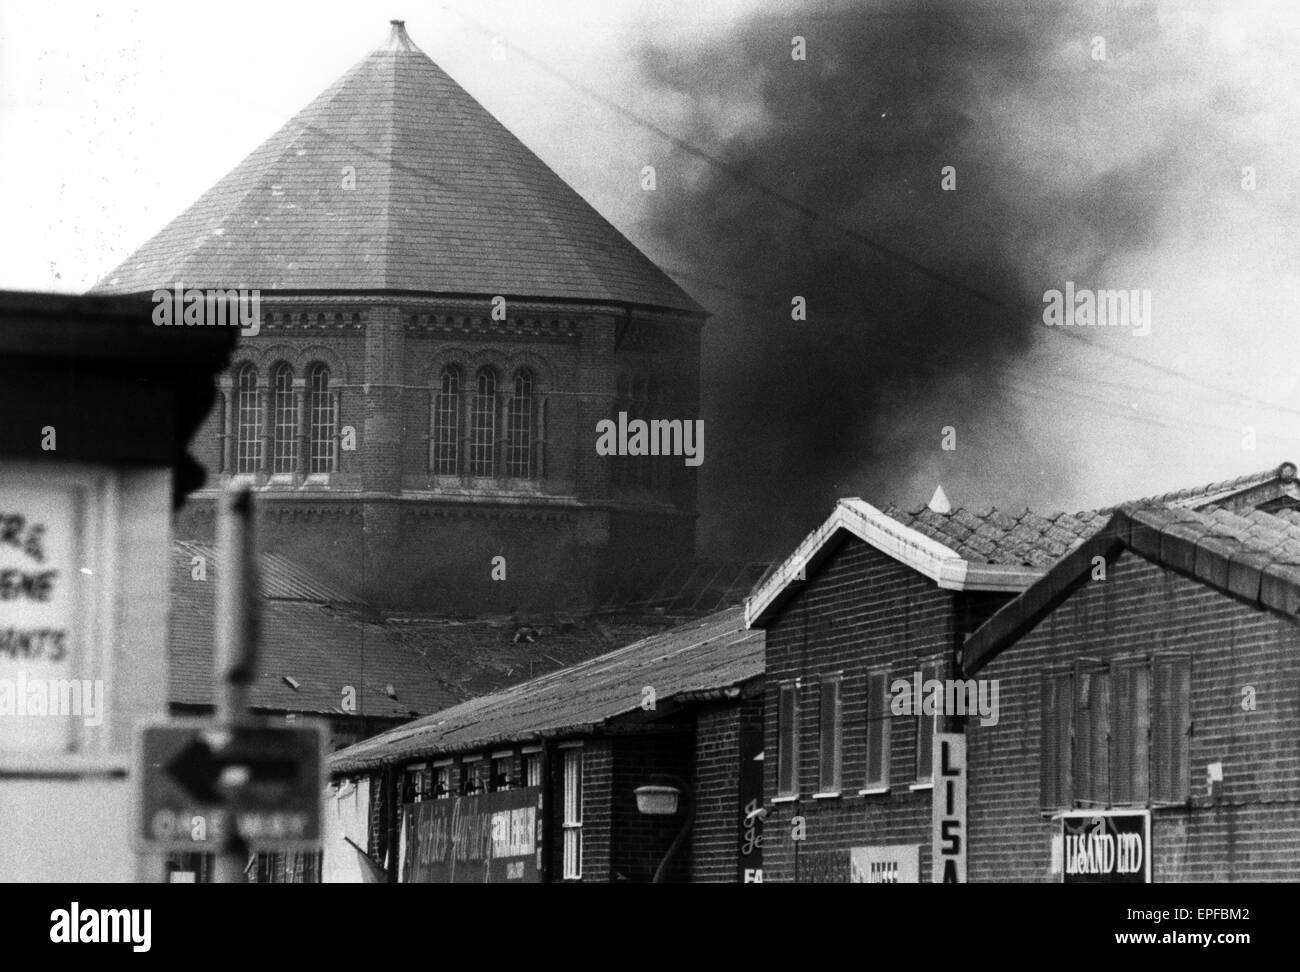 Strangeways Prison Riot 1st April 1990. A 25-day prison riot and rooftop protest at Strangeways Prison in Manchester, England. The riot began on the 1st April 1990 when prisoners took control of the prison chapel, and the riot quickly spread throughout mo Stock Photo